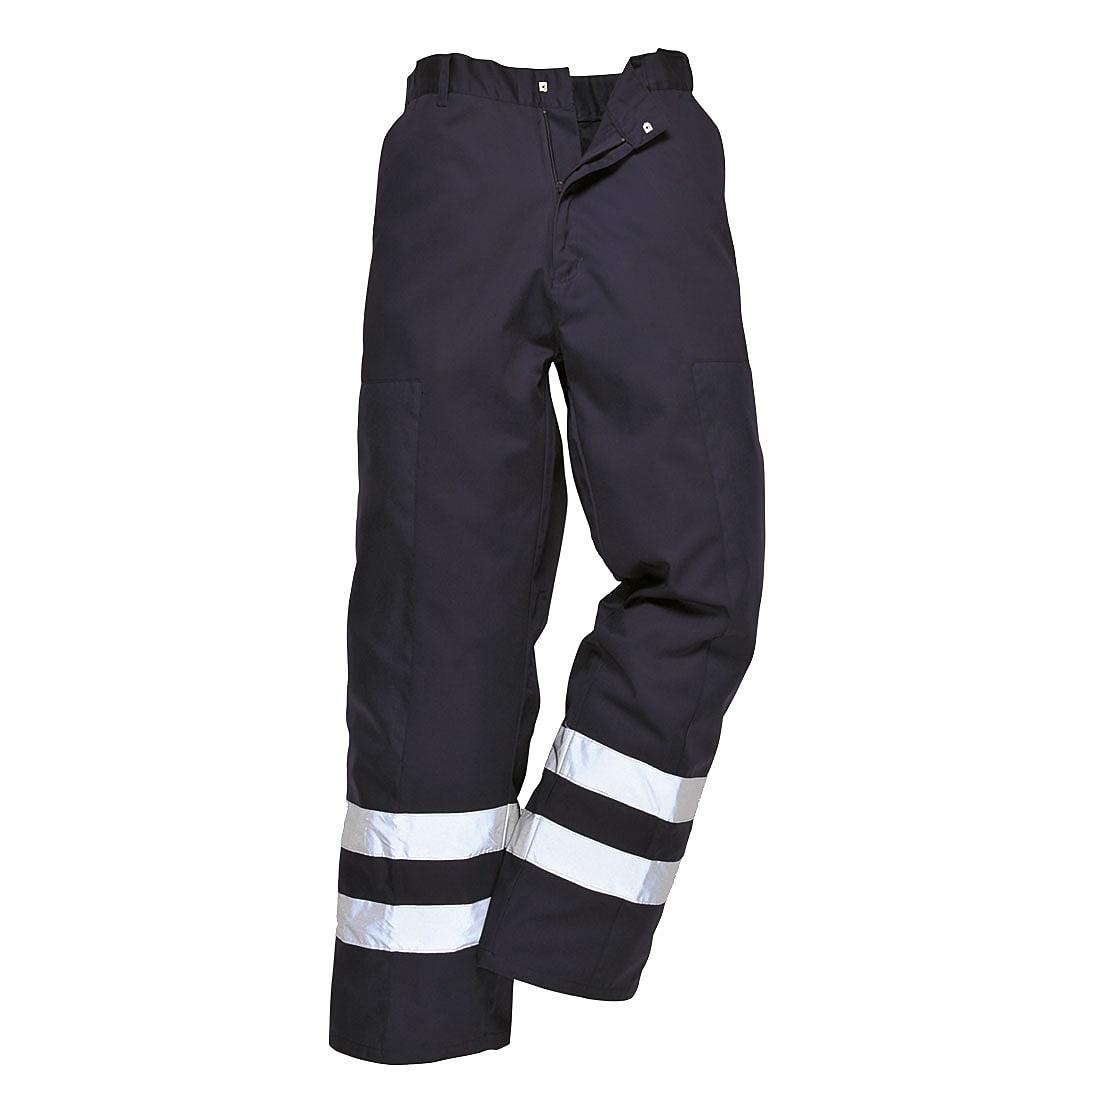 Portwest Ballistic Trousers in Black (Product Code: S918)